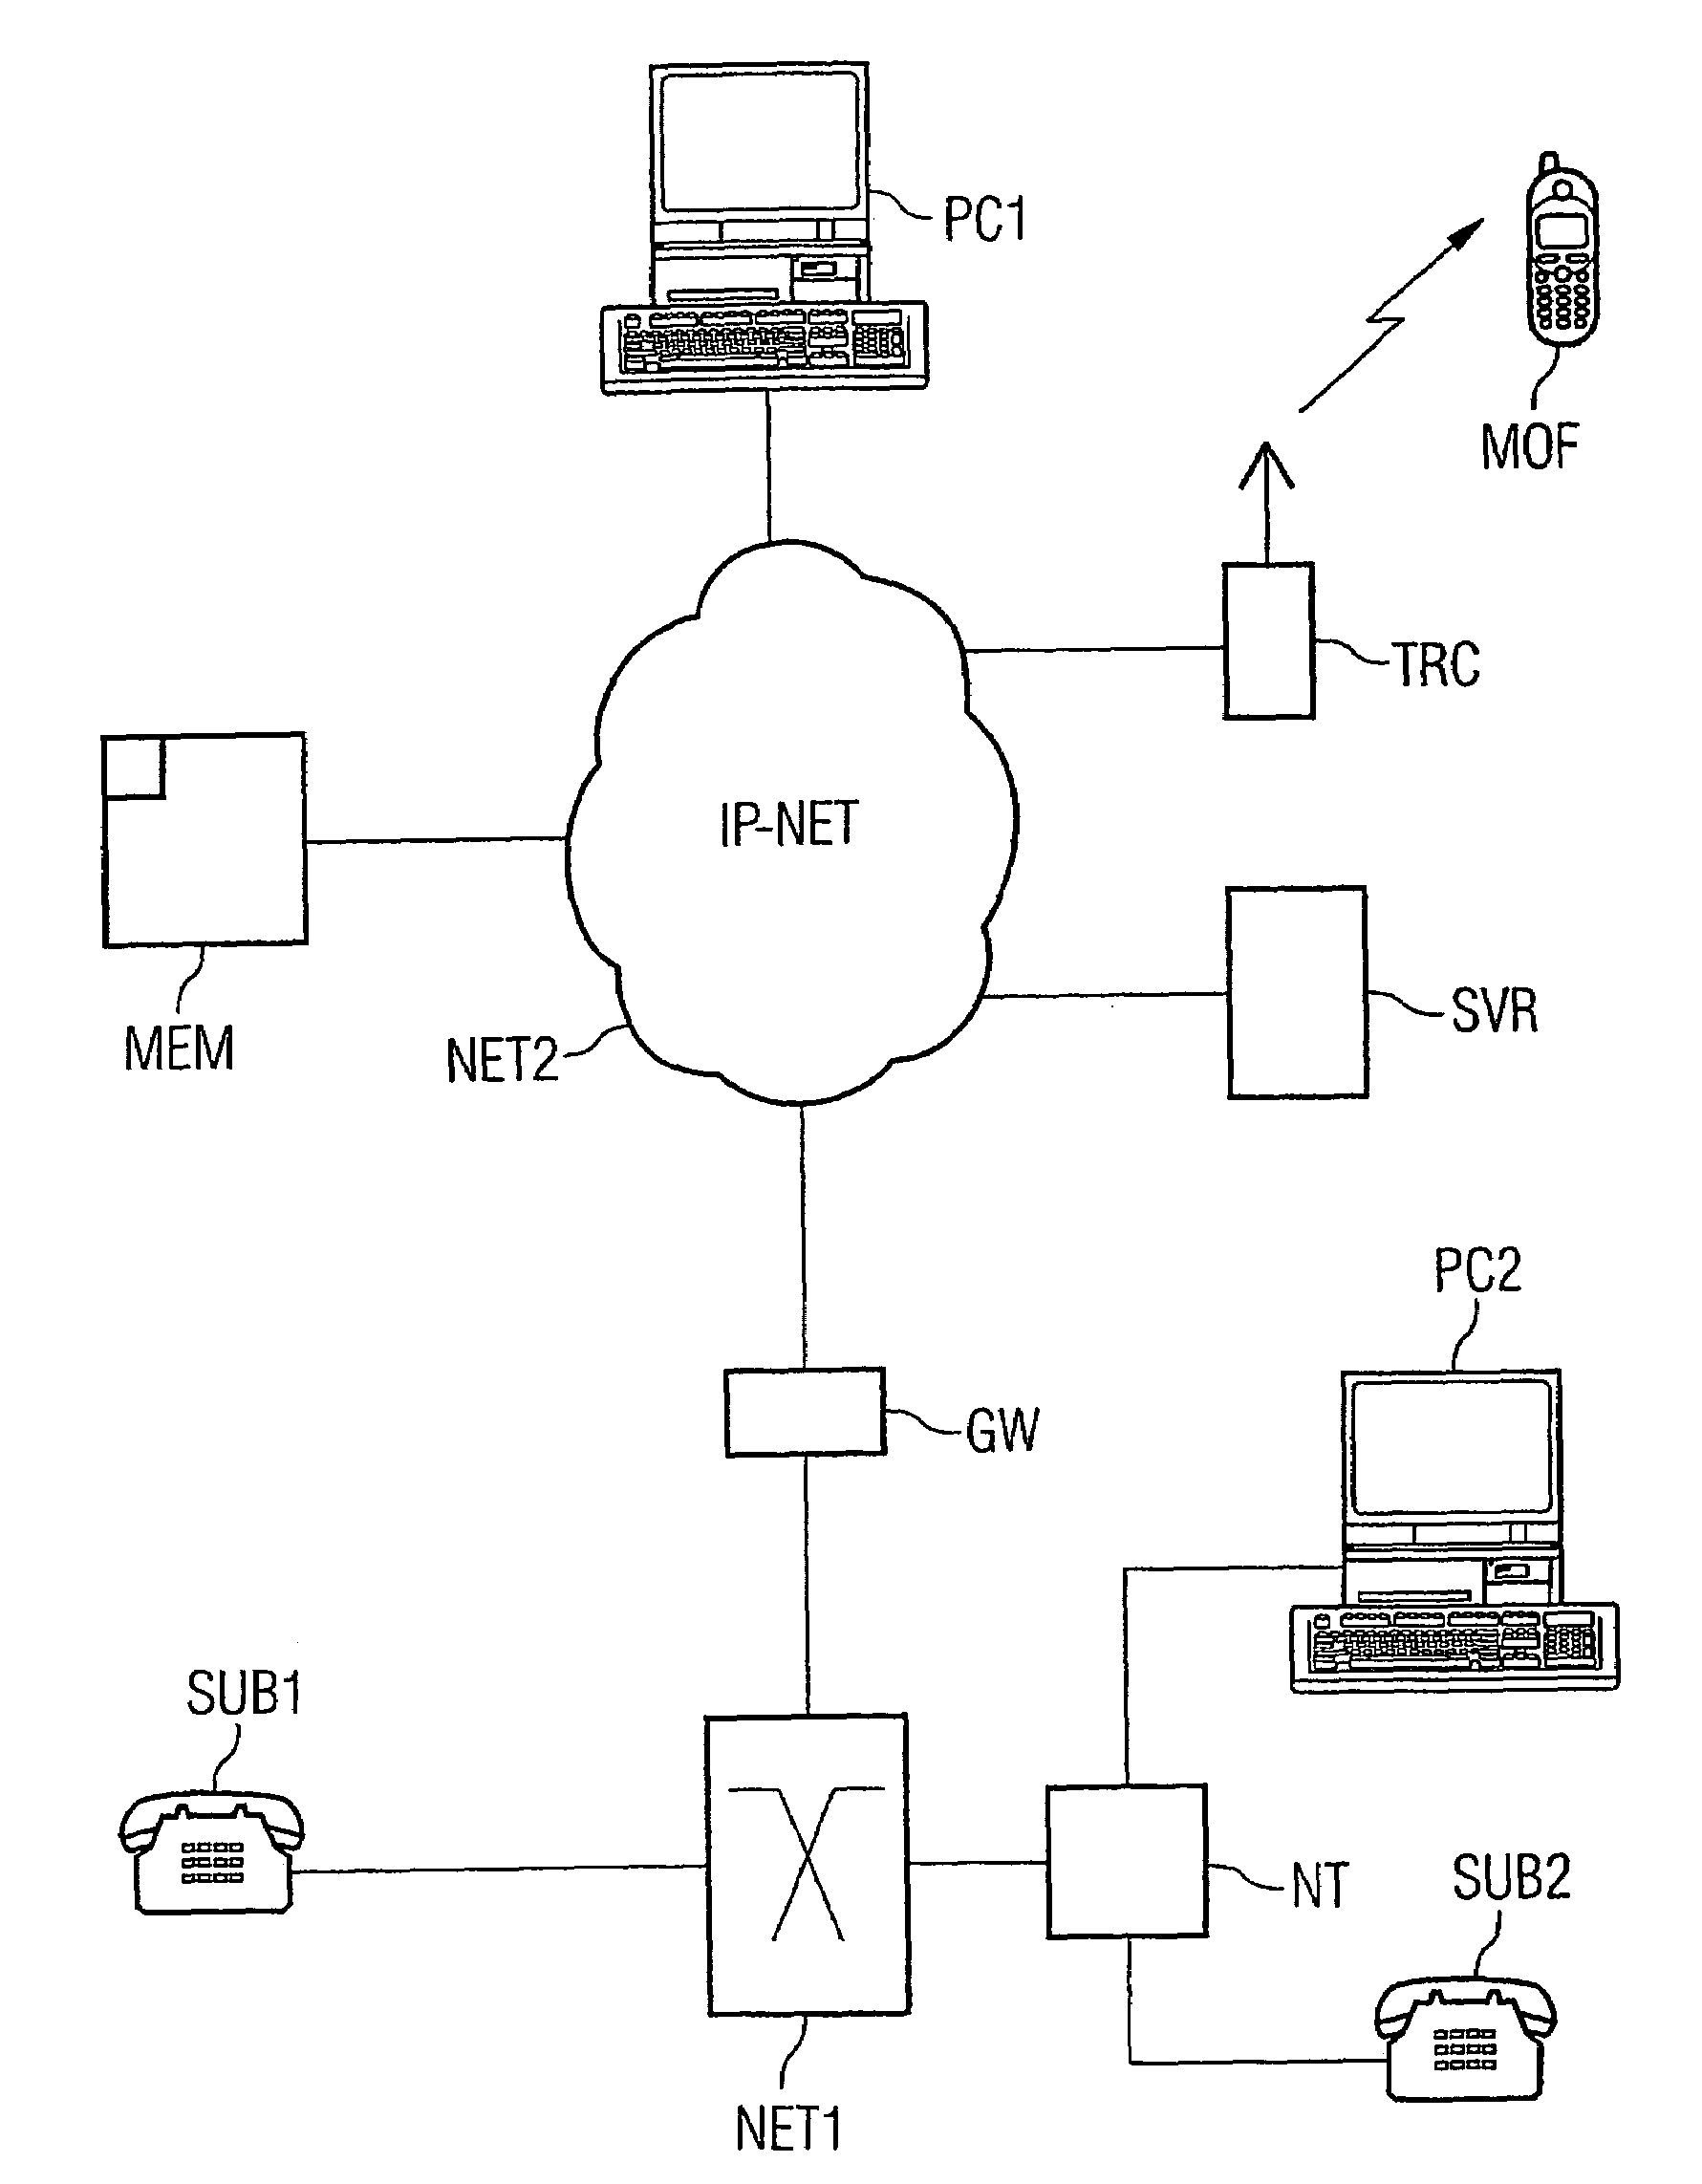 Method for expediting a short message via a server when a communication participant of a communication network is not available